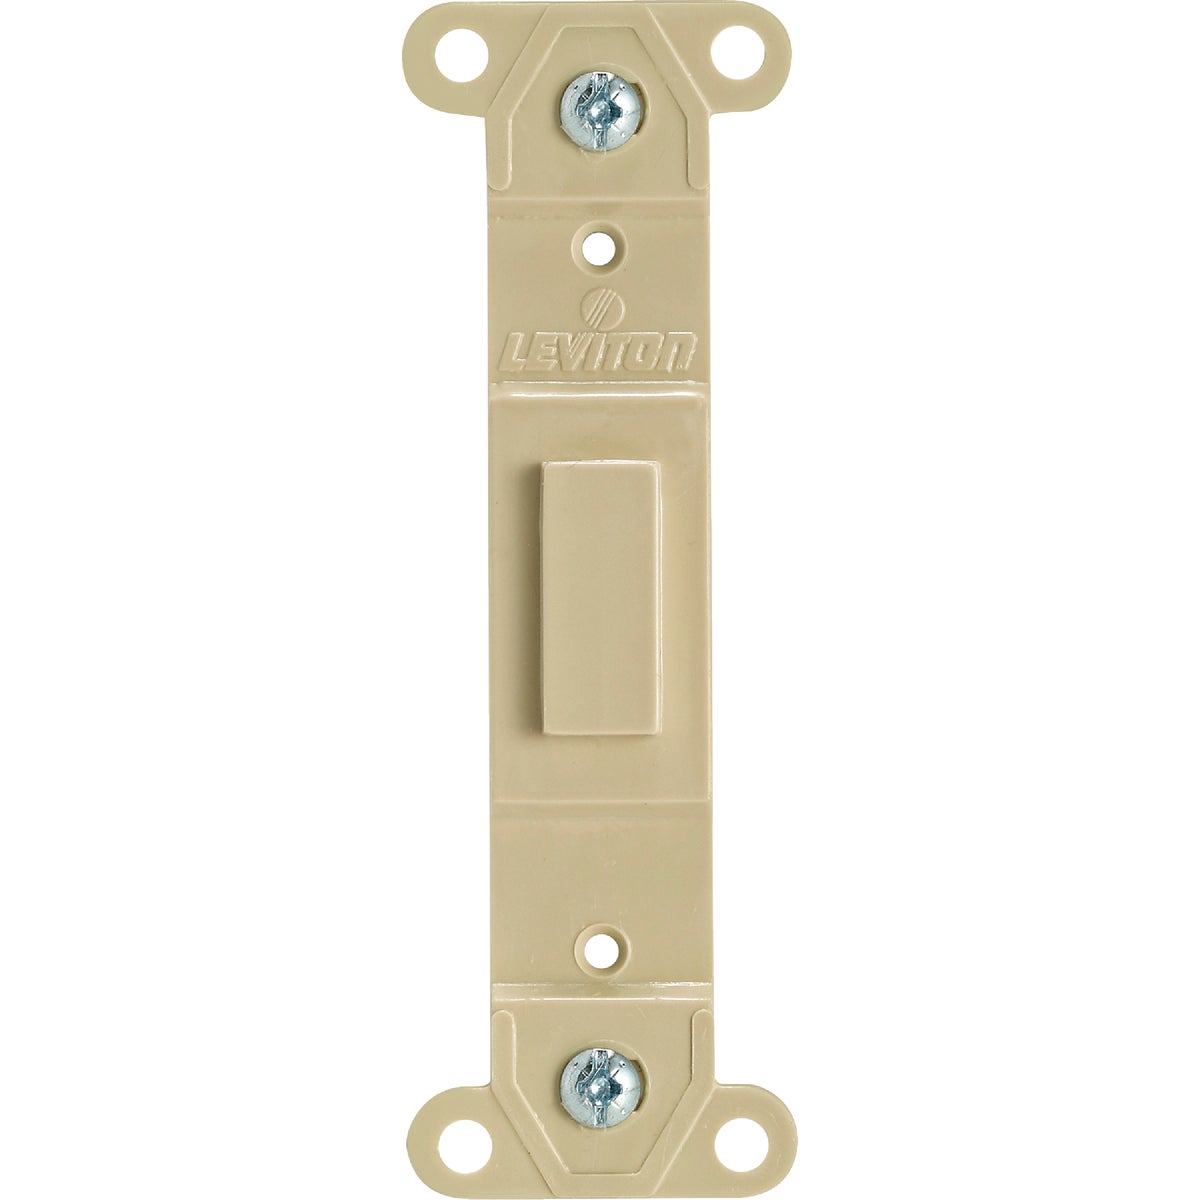 Item 502105, Wall plate insert adapter. Blank plastic toggle with no hole.